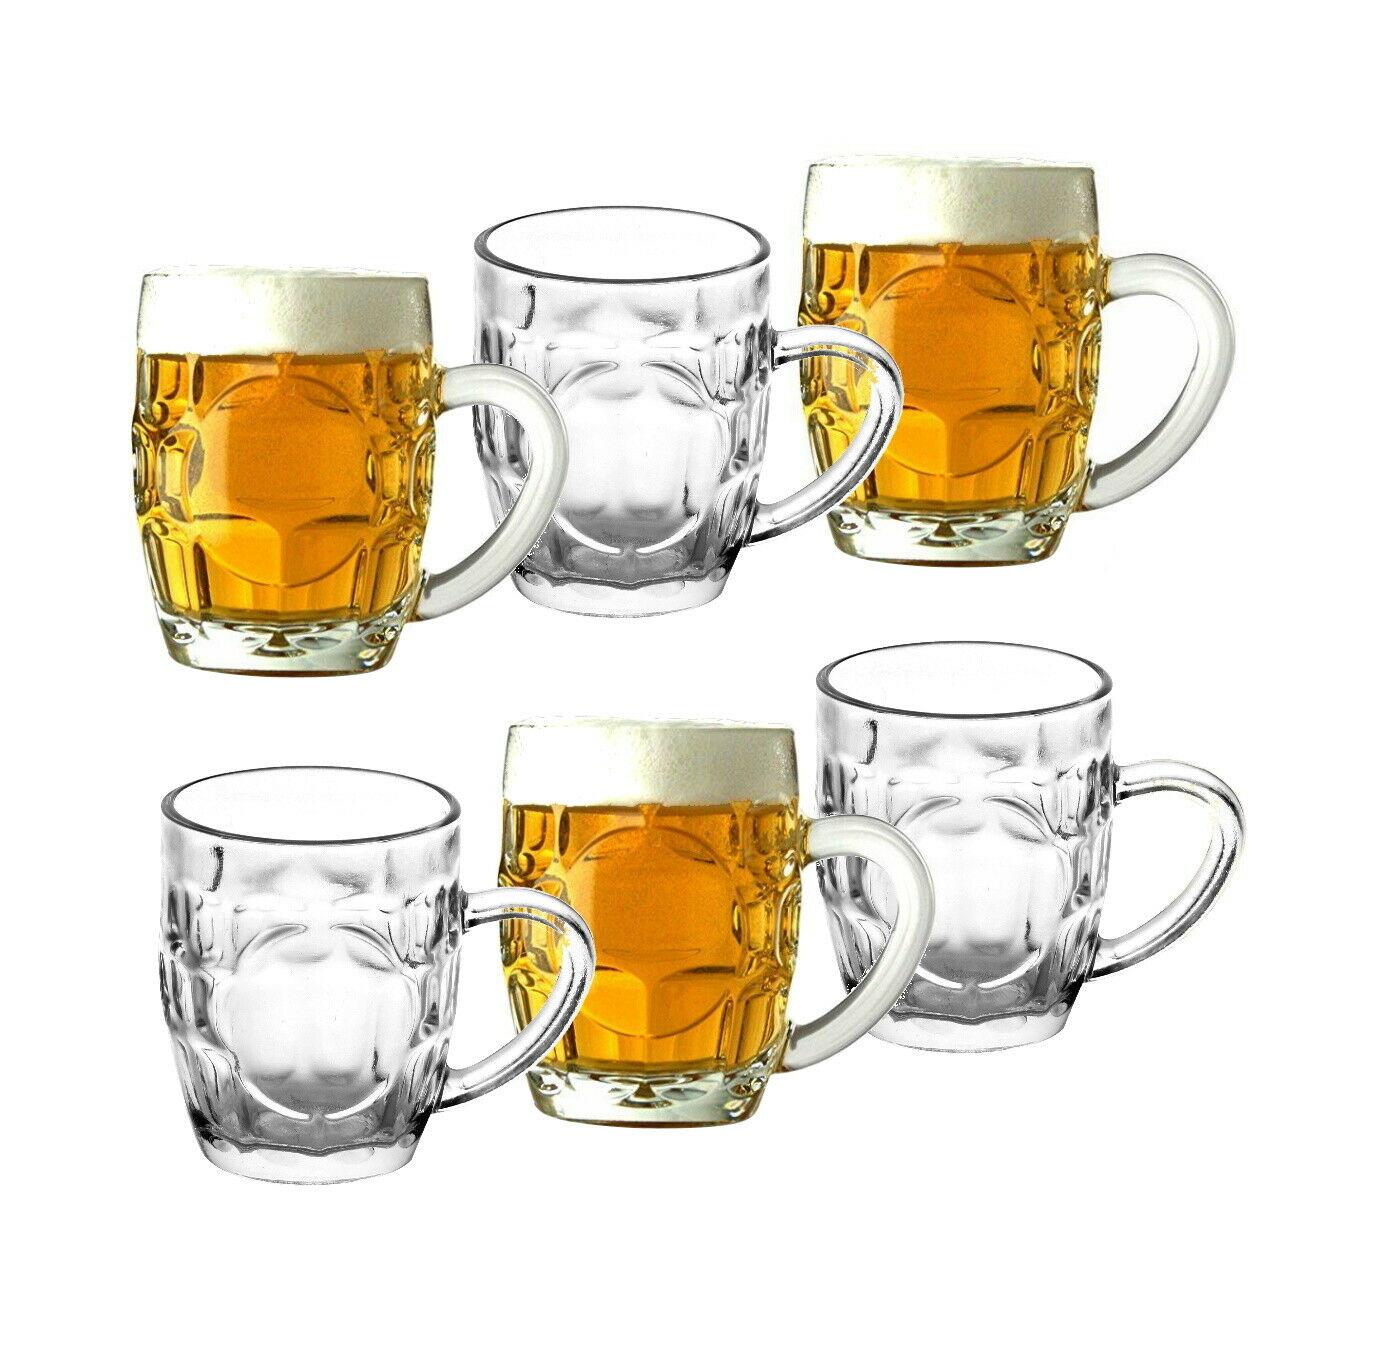 Details about   Brass BEER MUGS With Glass Bottom 2 